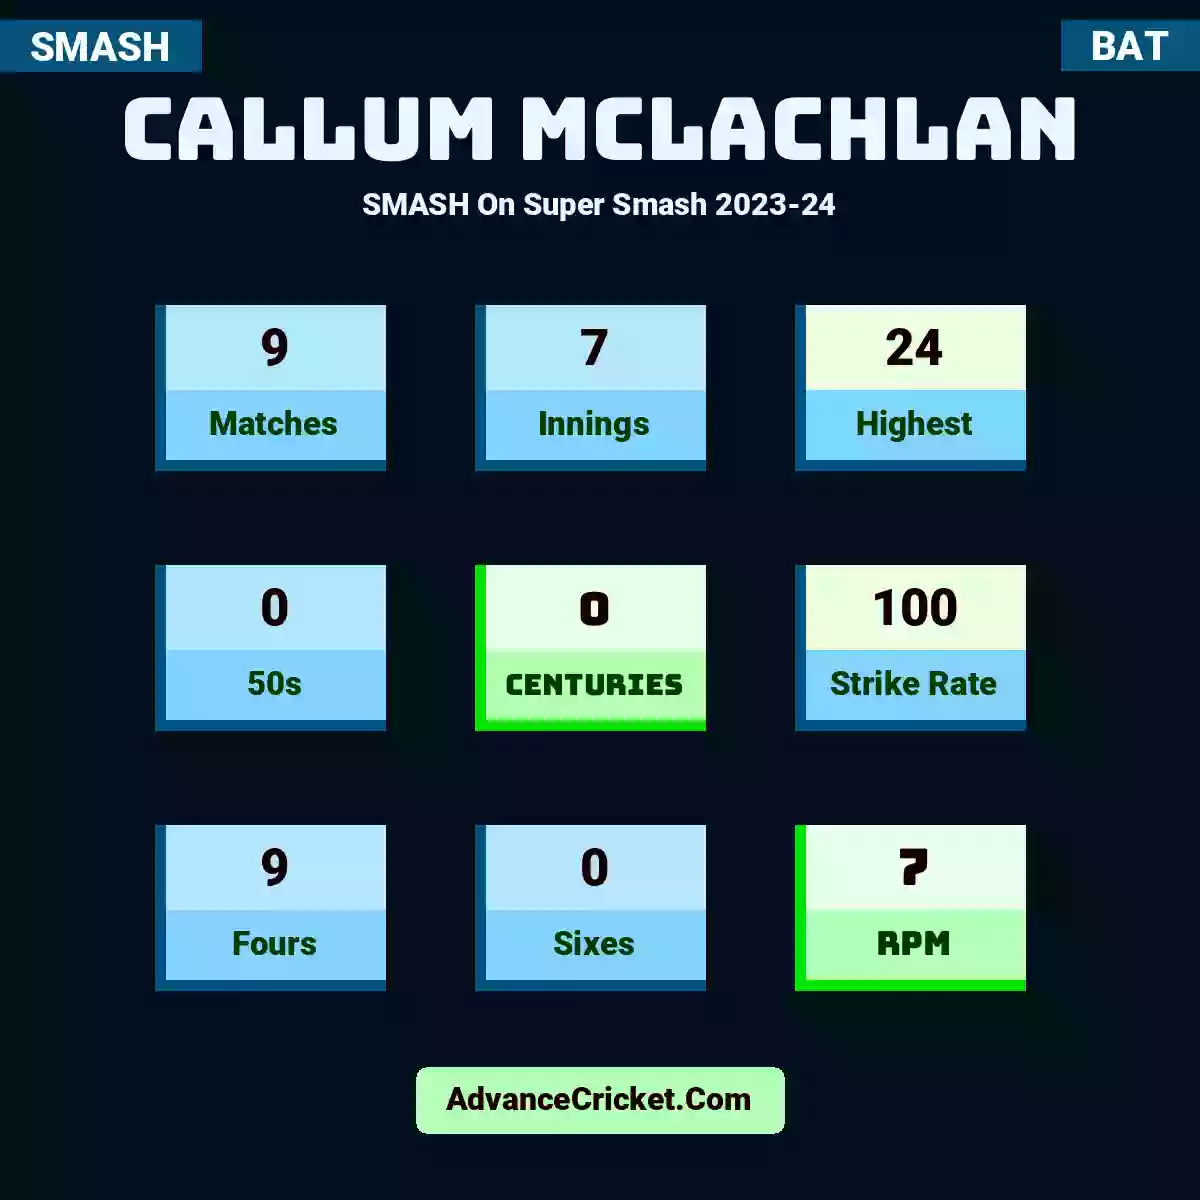 Callum McLachlan SMASH  On Super Smash 2023-24, Callum McLachlan played 9 matches, scored 24 runs as highest, 0 half-centuries, and 0 centuries, with a strike rate of 100. C.McLachlan hit 9 fours and 0 sixes, with an RPM of 7.